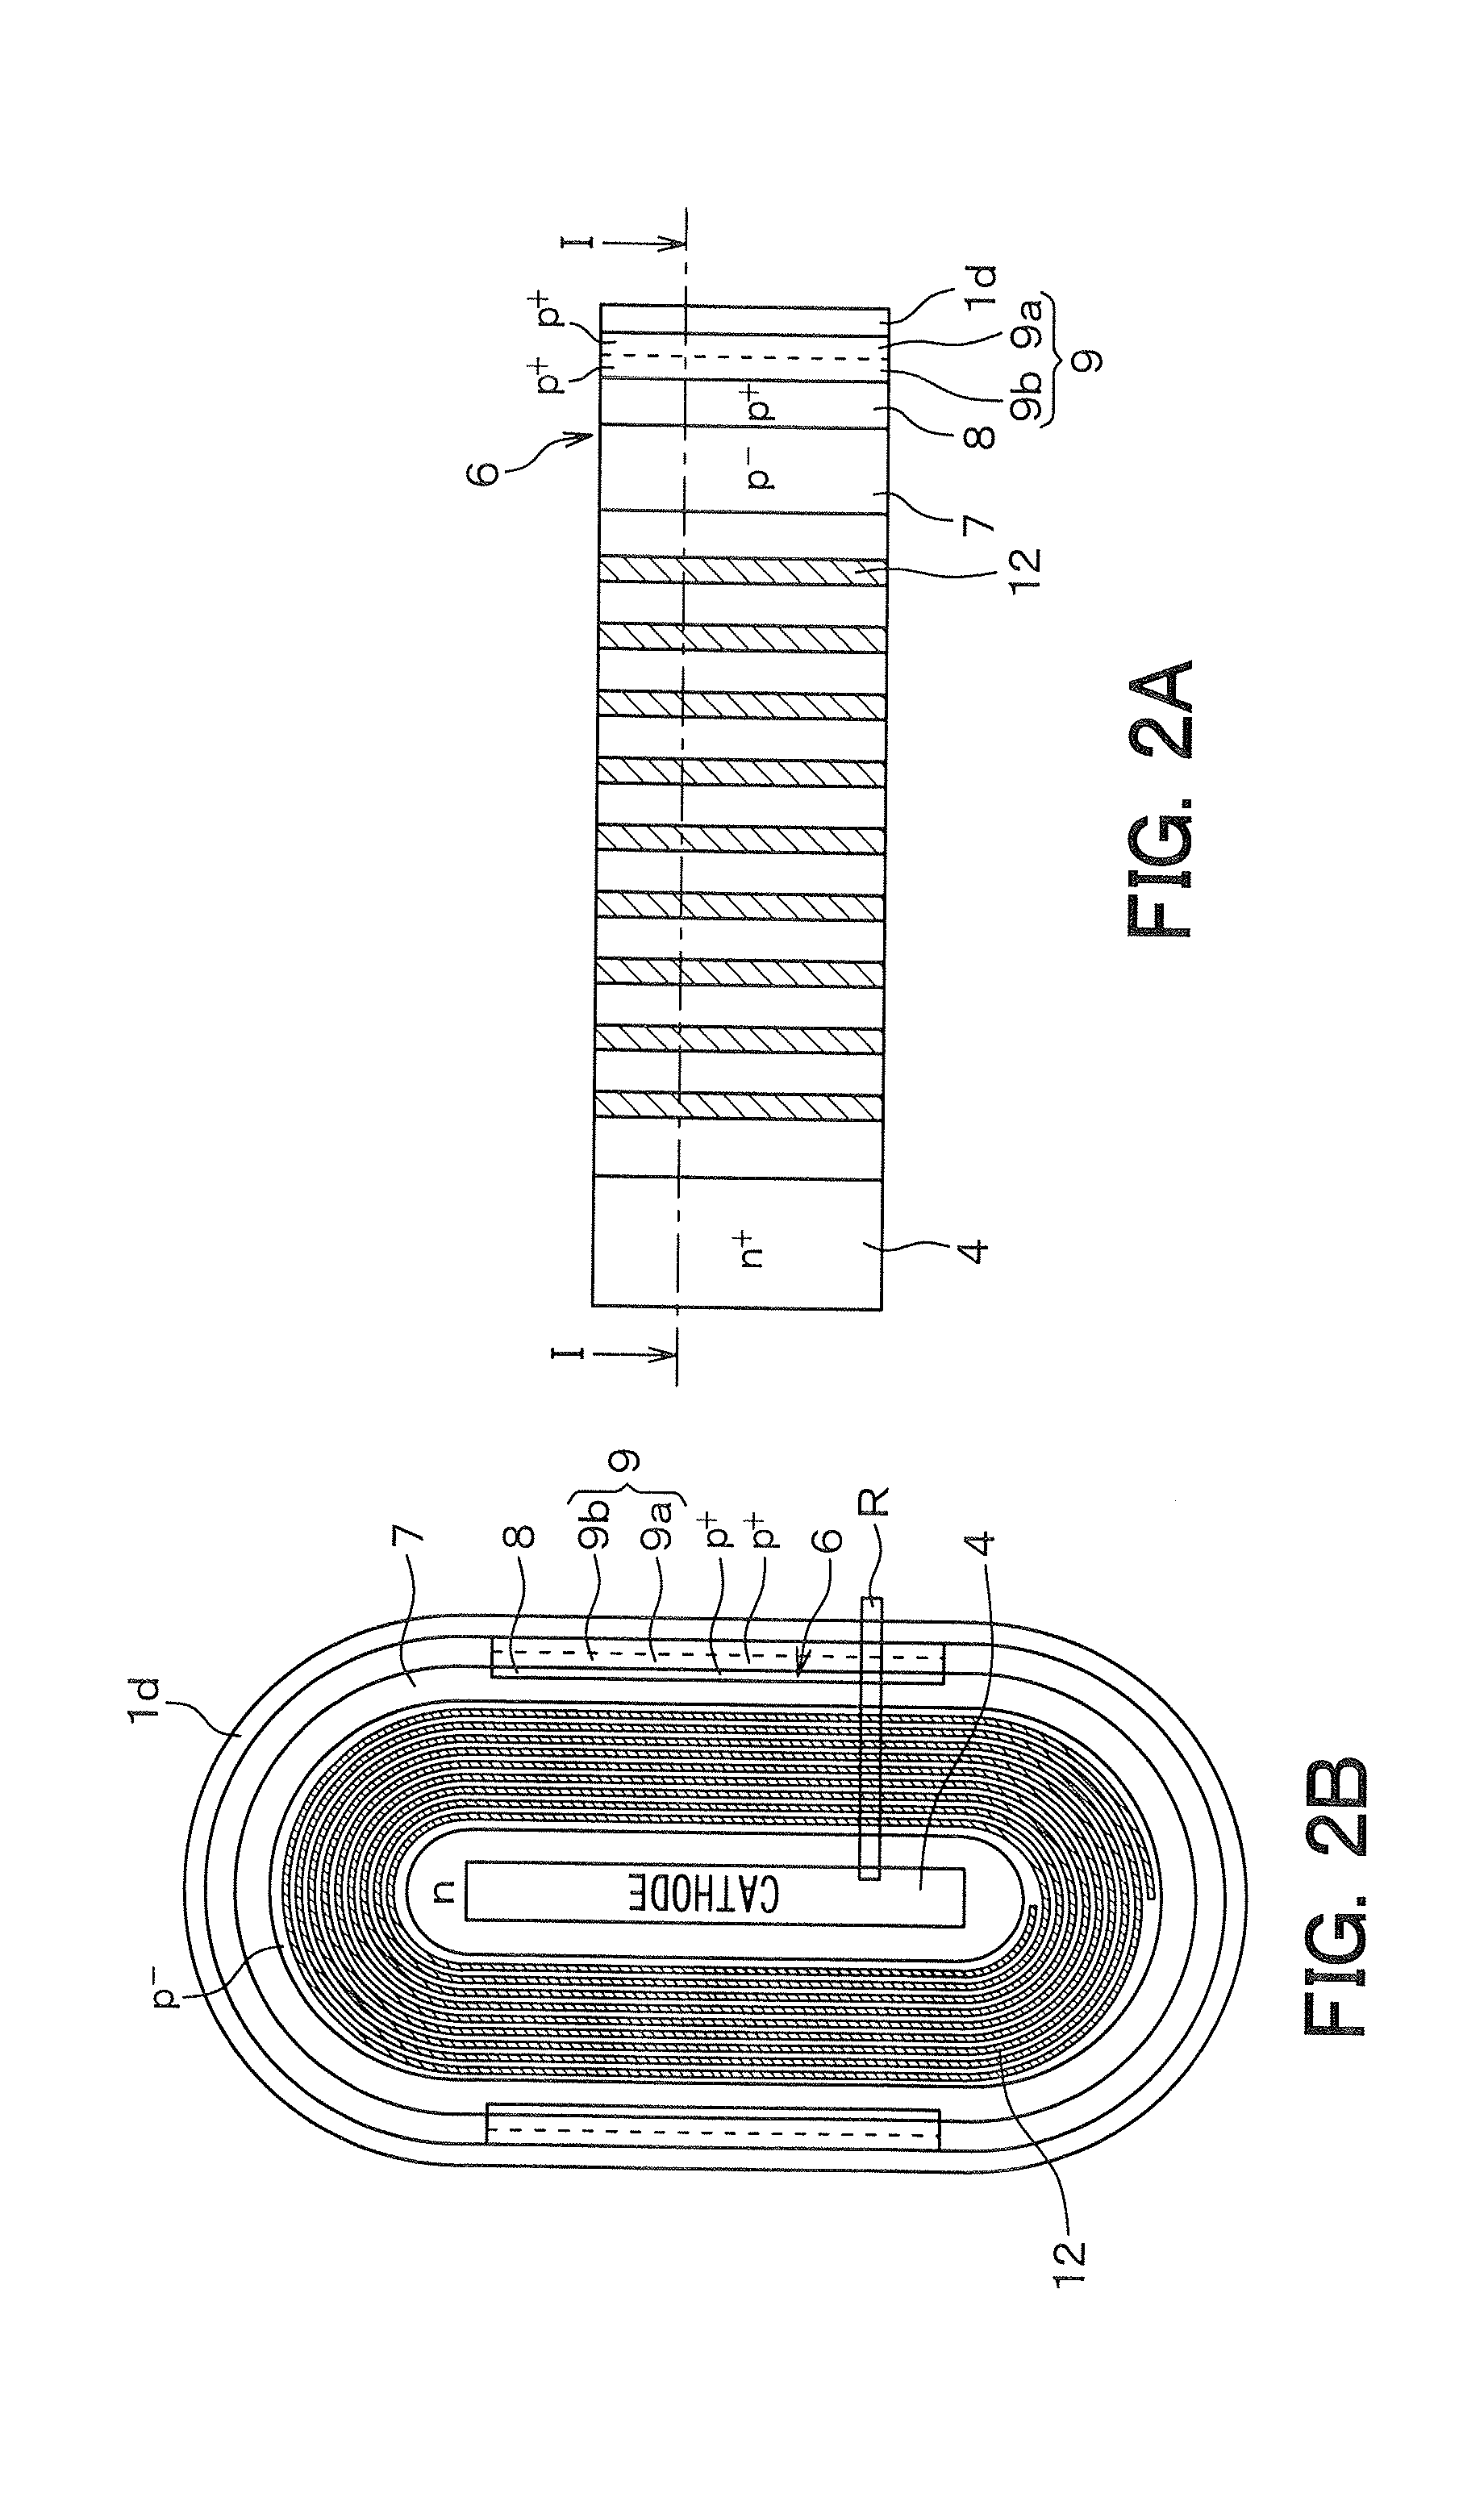 Semiconductor device having lateral diode